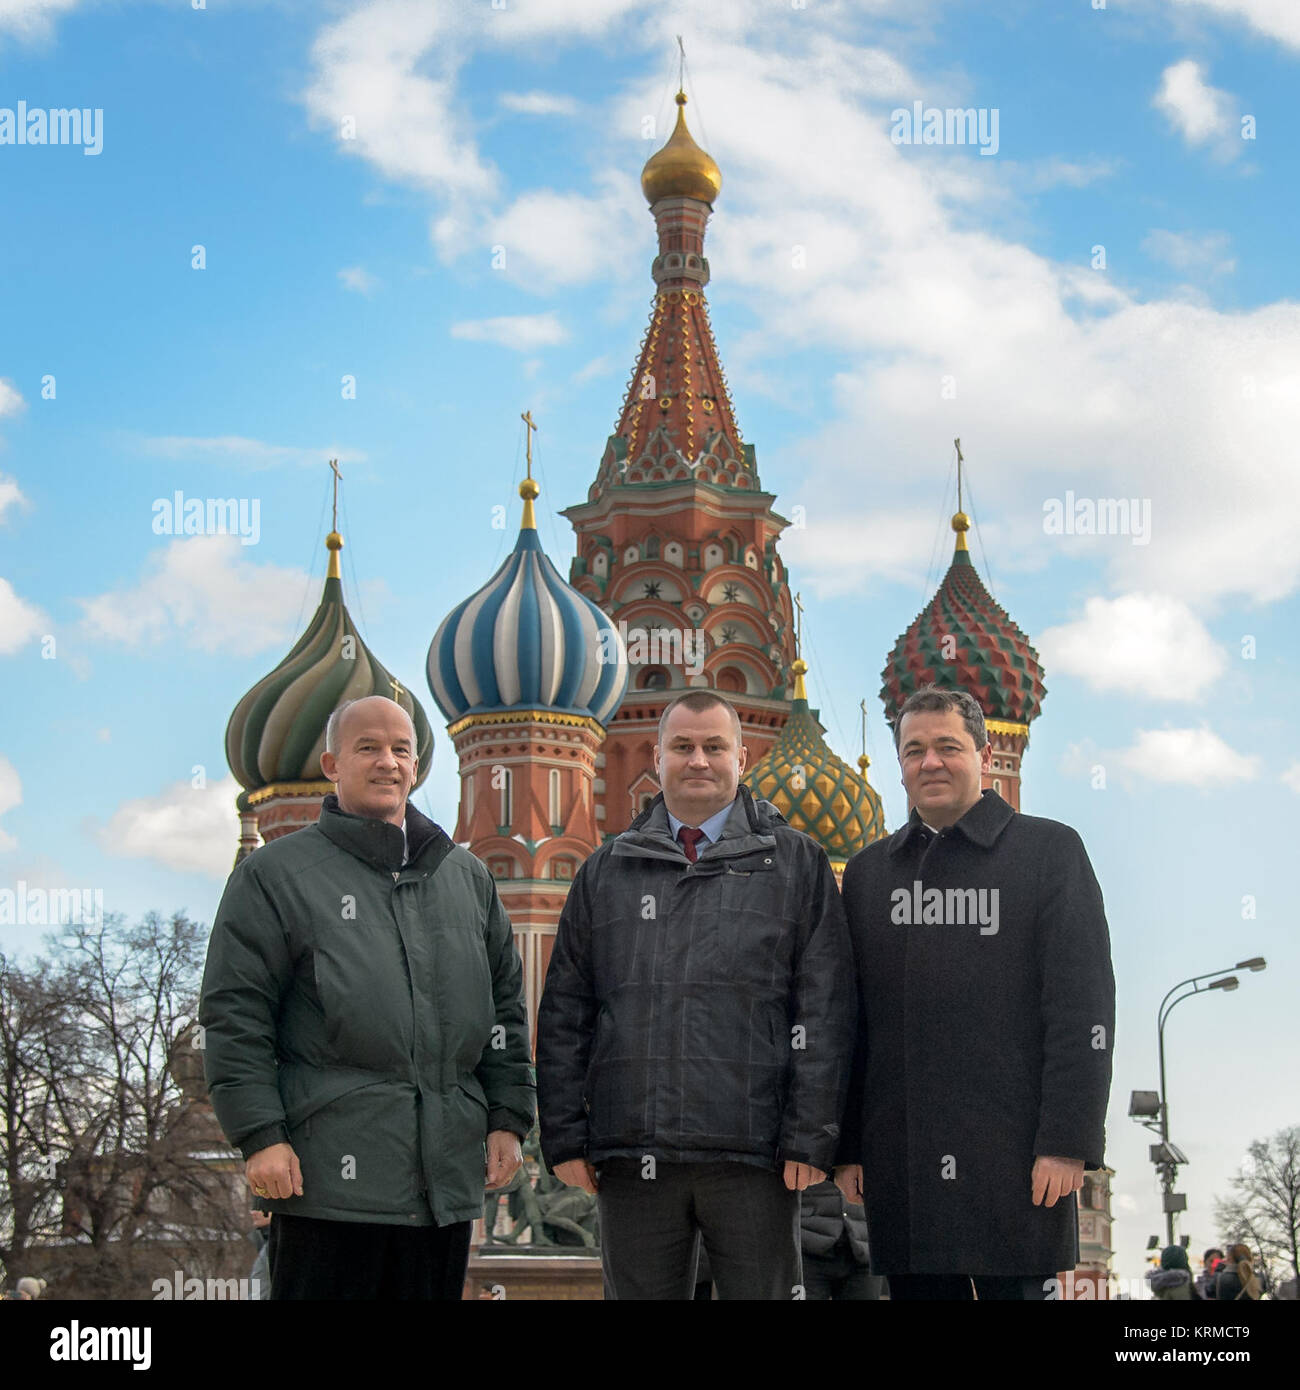 Expedition 47 crew members: NASA astronaut Jeff Williams, left, Russian cosmonauts Alexei Ovchinin, center, and Oleg Skripochka of Roscosmos, pose for a photograph in front of Saint Basil's Cathedral in Red Square shortly after having laid roses at the site where Russian space icons are interred as part of traditional pre-launch ceremonies Friday, Feb. 26, 2016, Moscow, Russia. Photo Credit: (NASA/Bill Ingalls) Expedition 47 Preflight (NHQ201602260001) Stock Photo